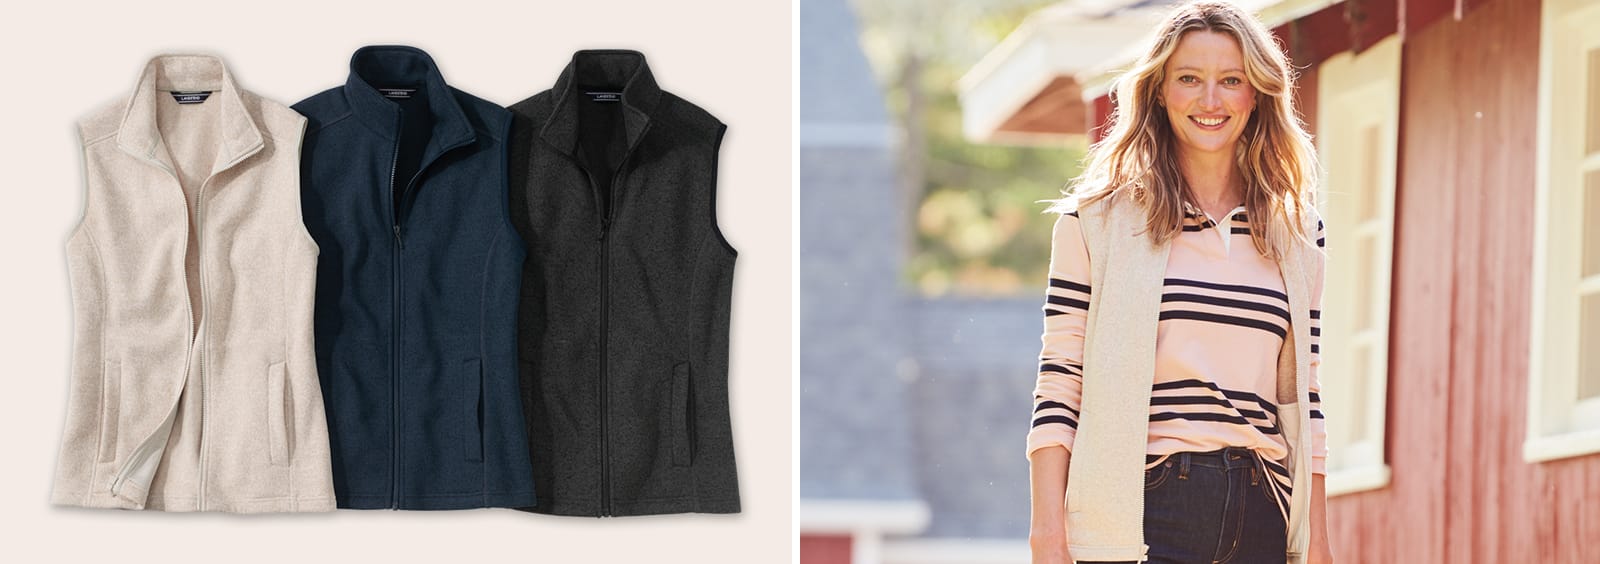 How Do You Wear a Sweater Vest in the Fall?